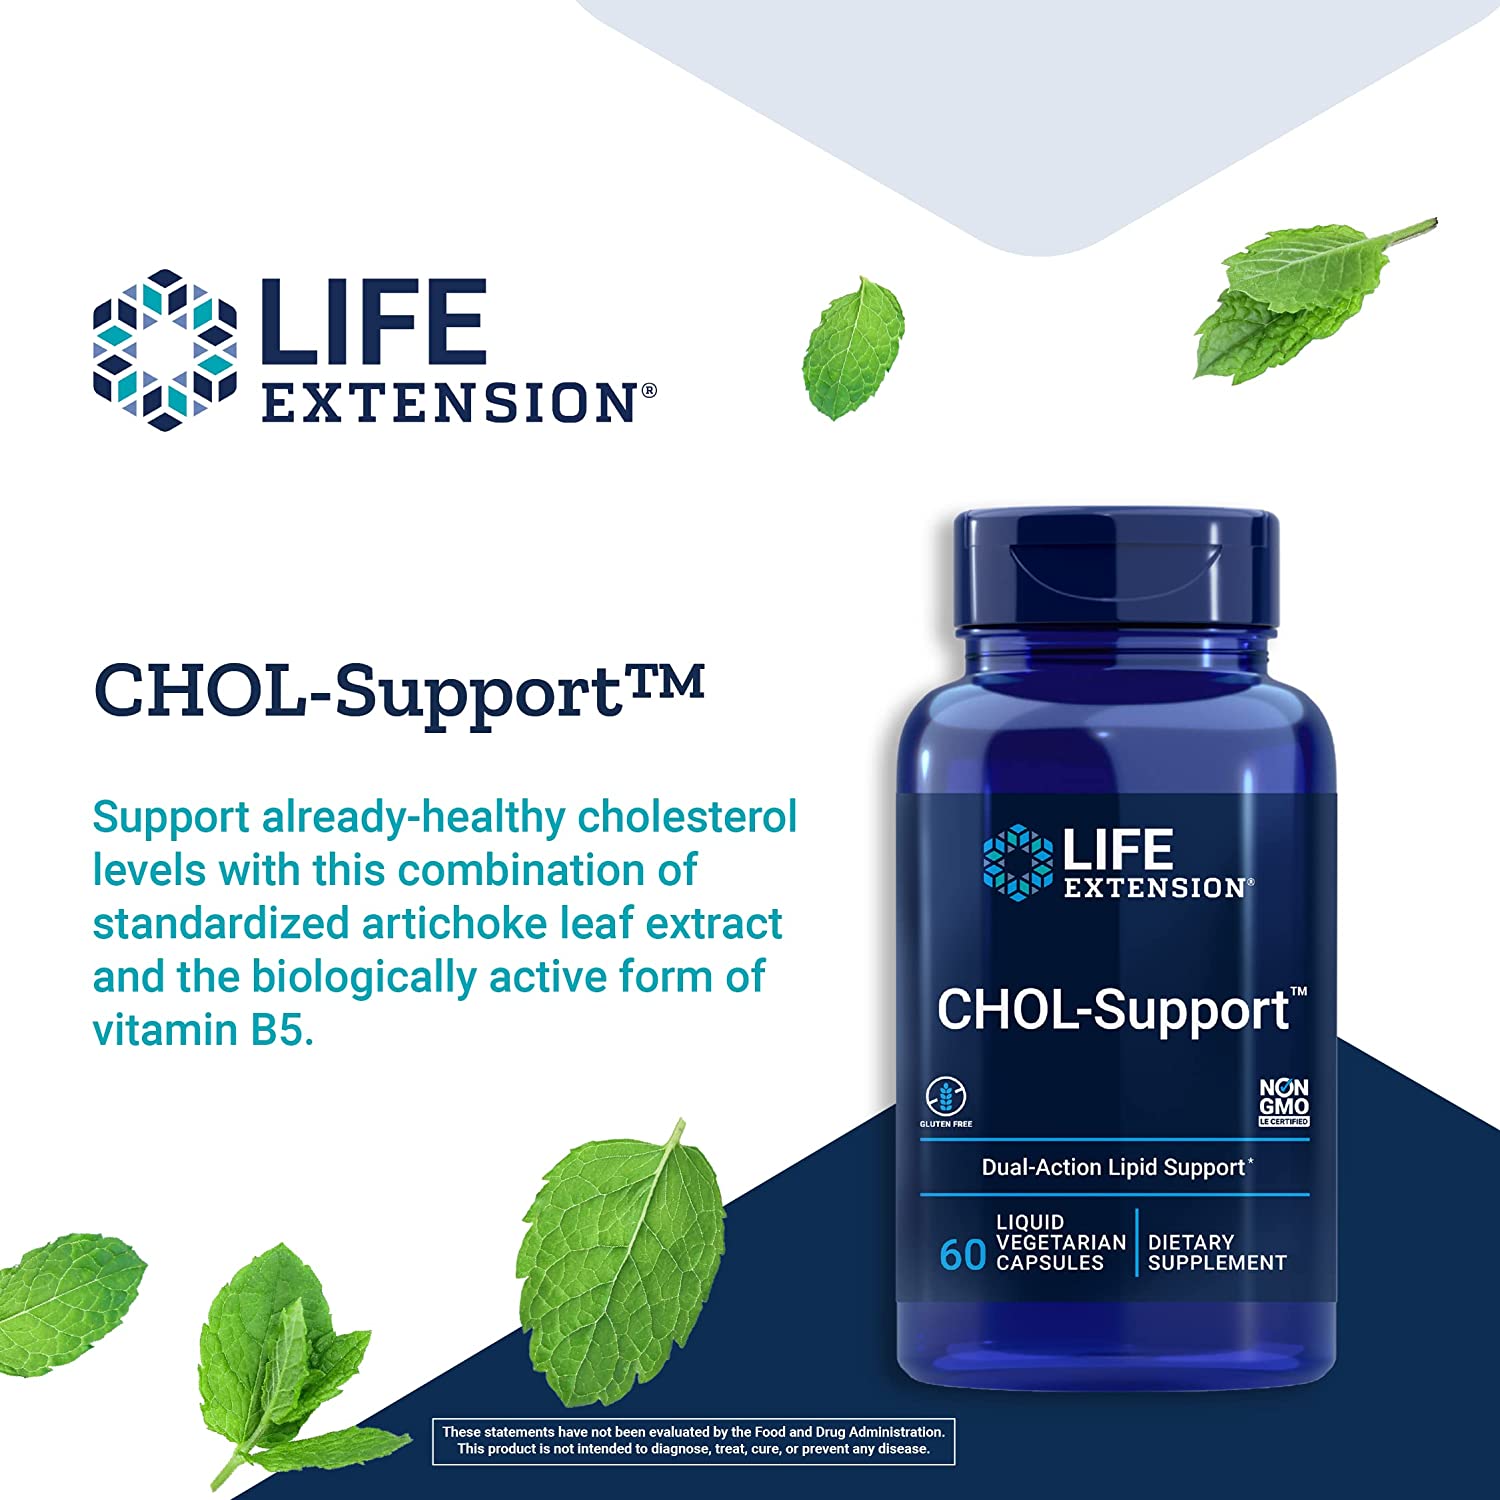 Life Extension CHOL-Support